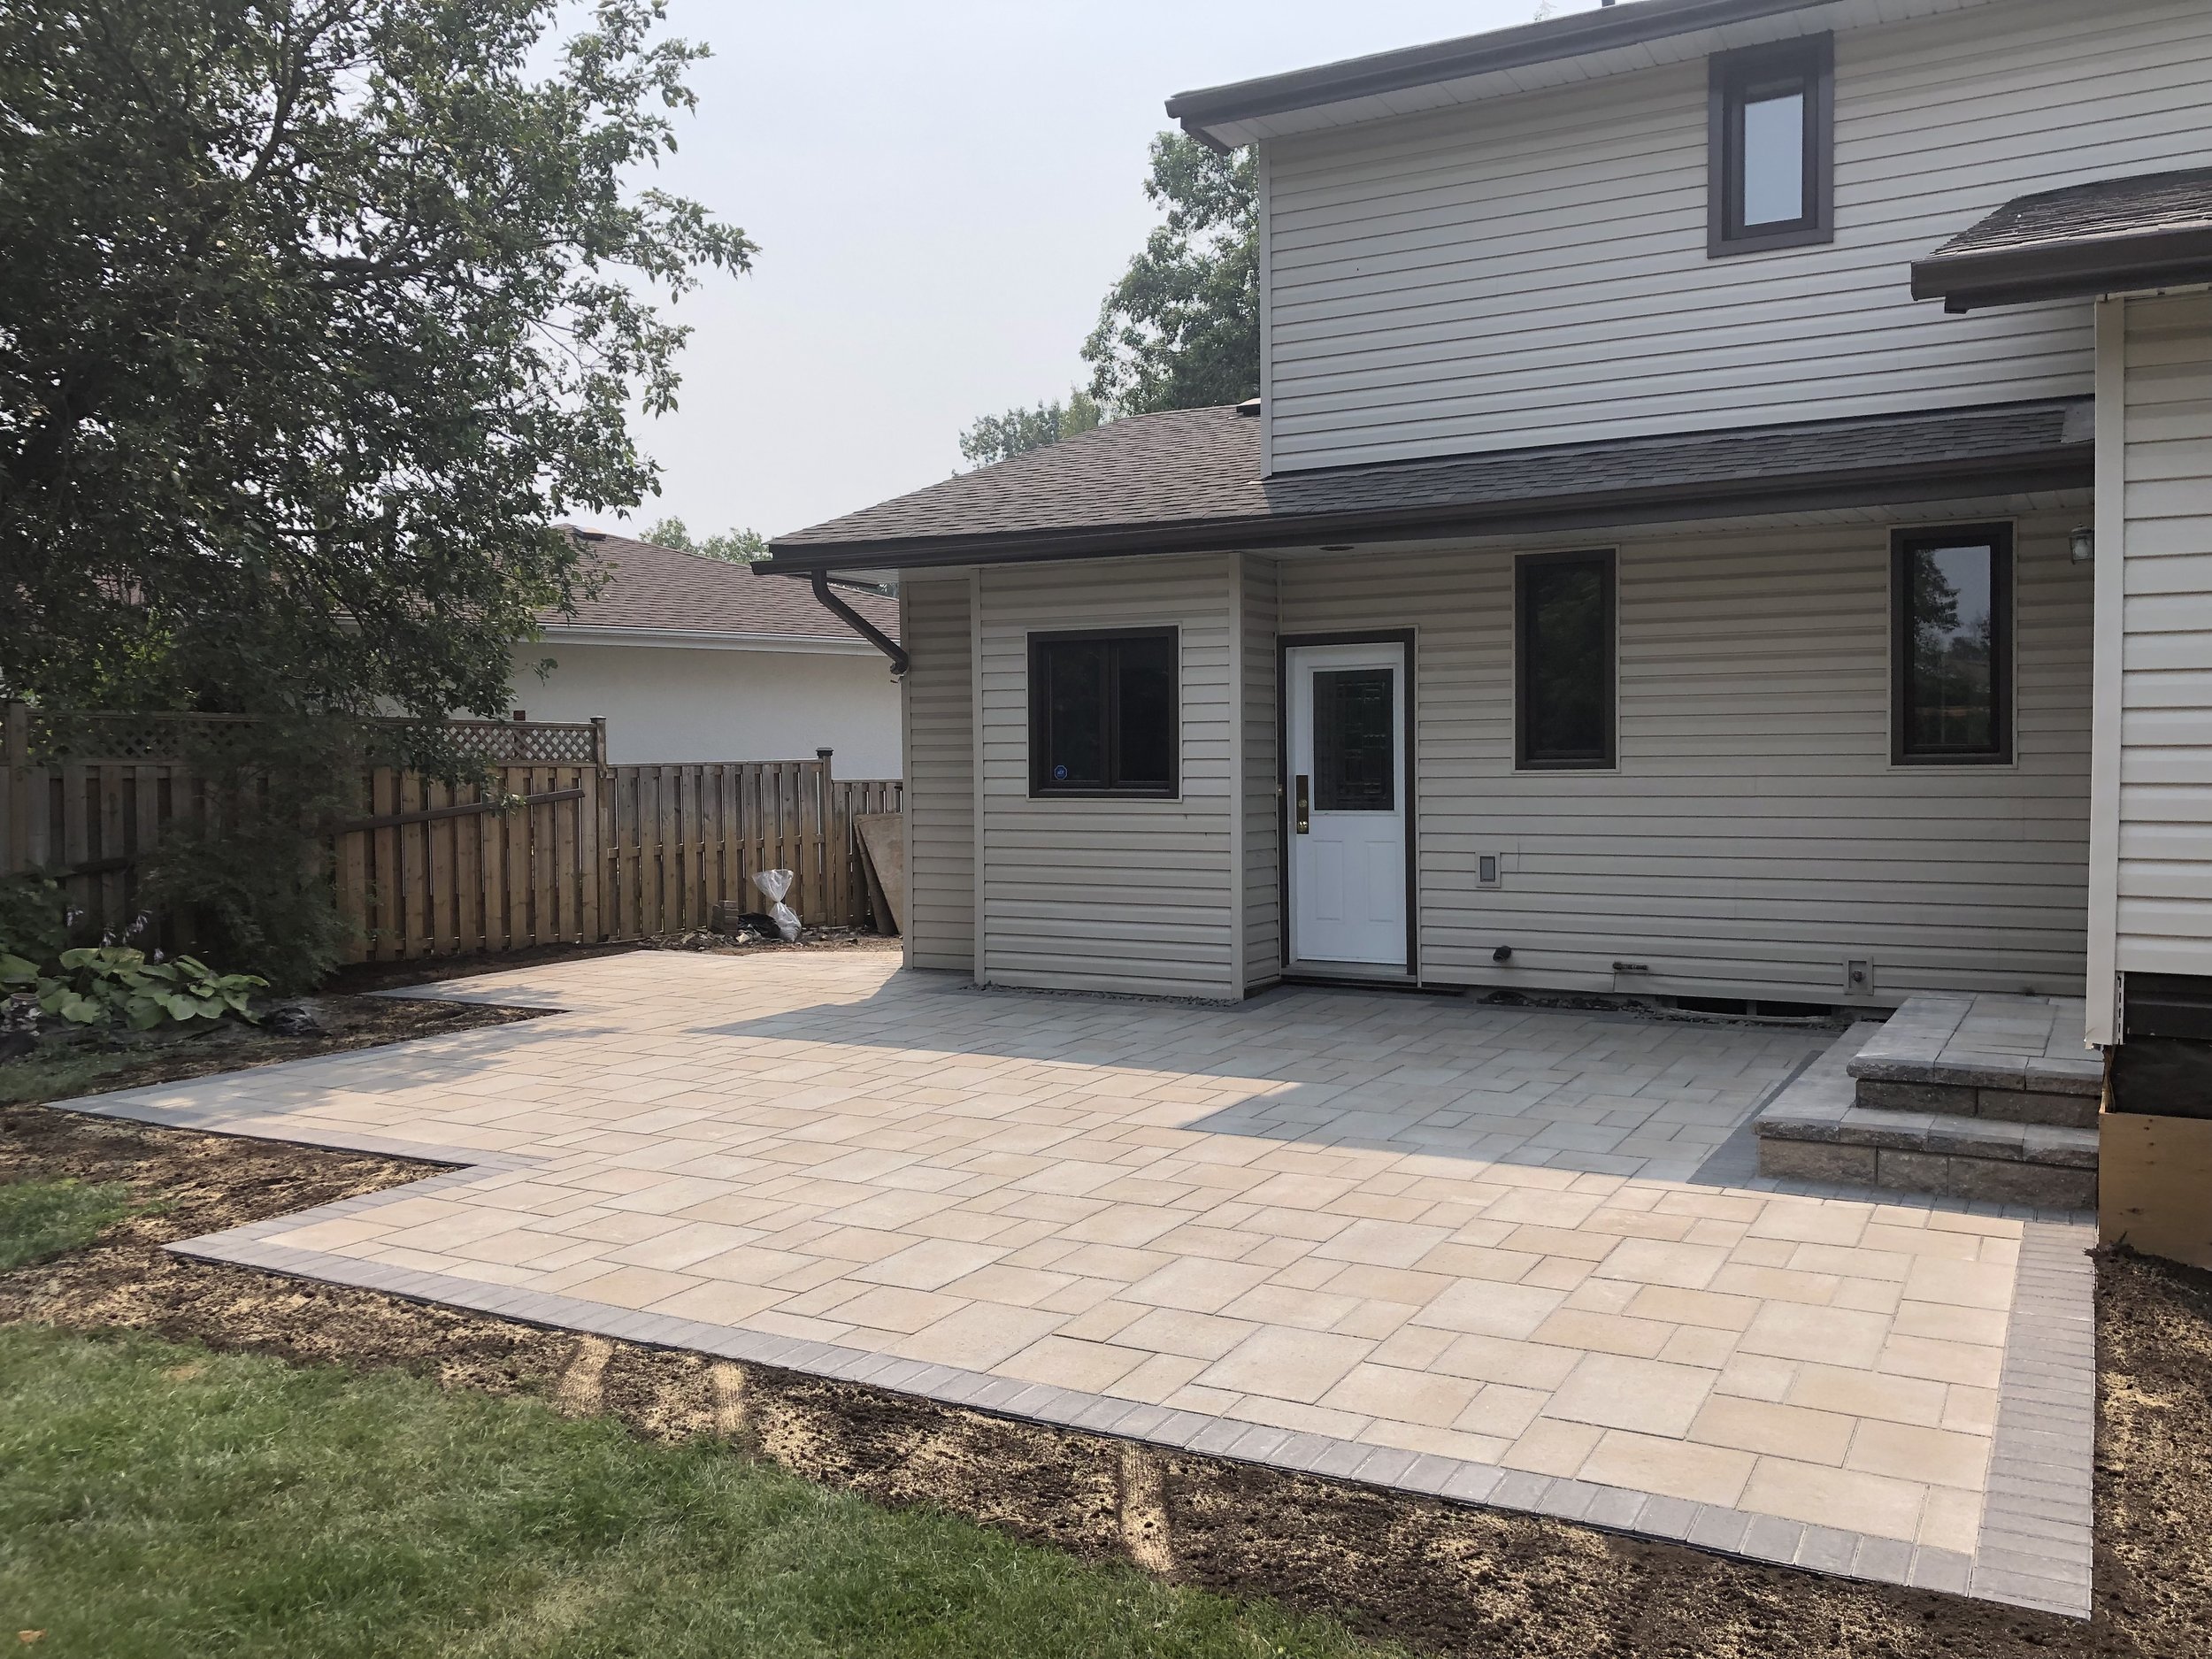 Beautiful backyard patio we made with Browns Aztec Pavers